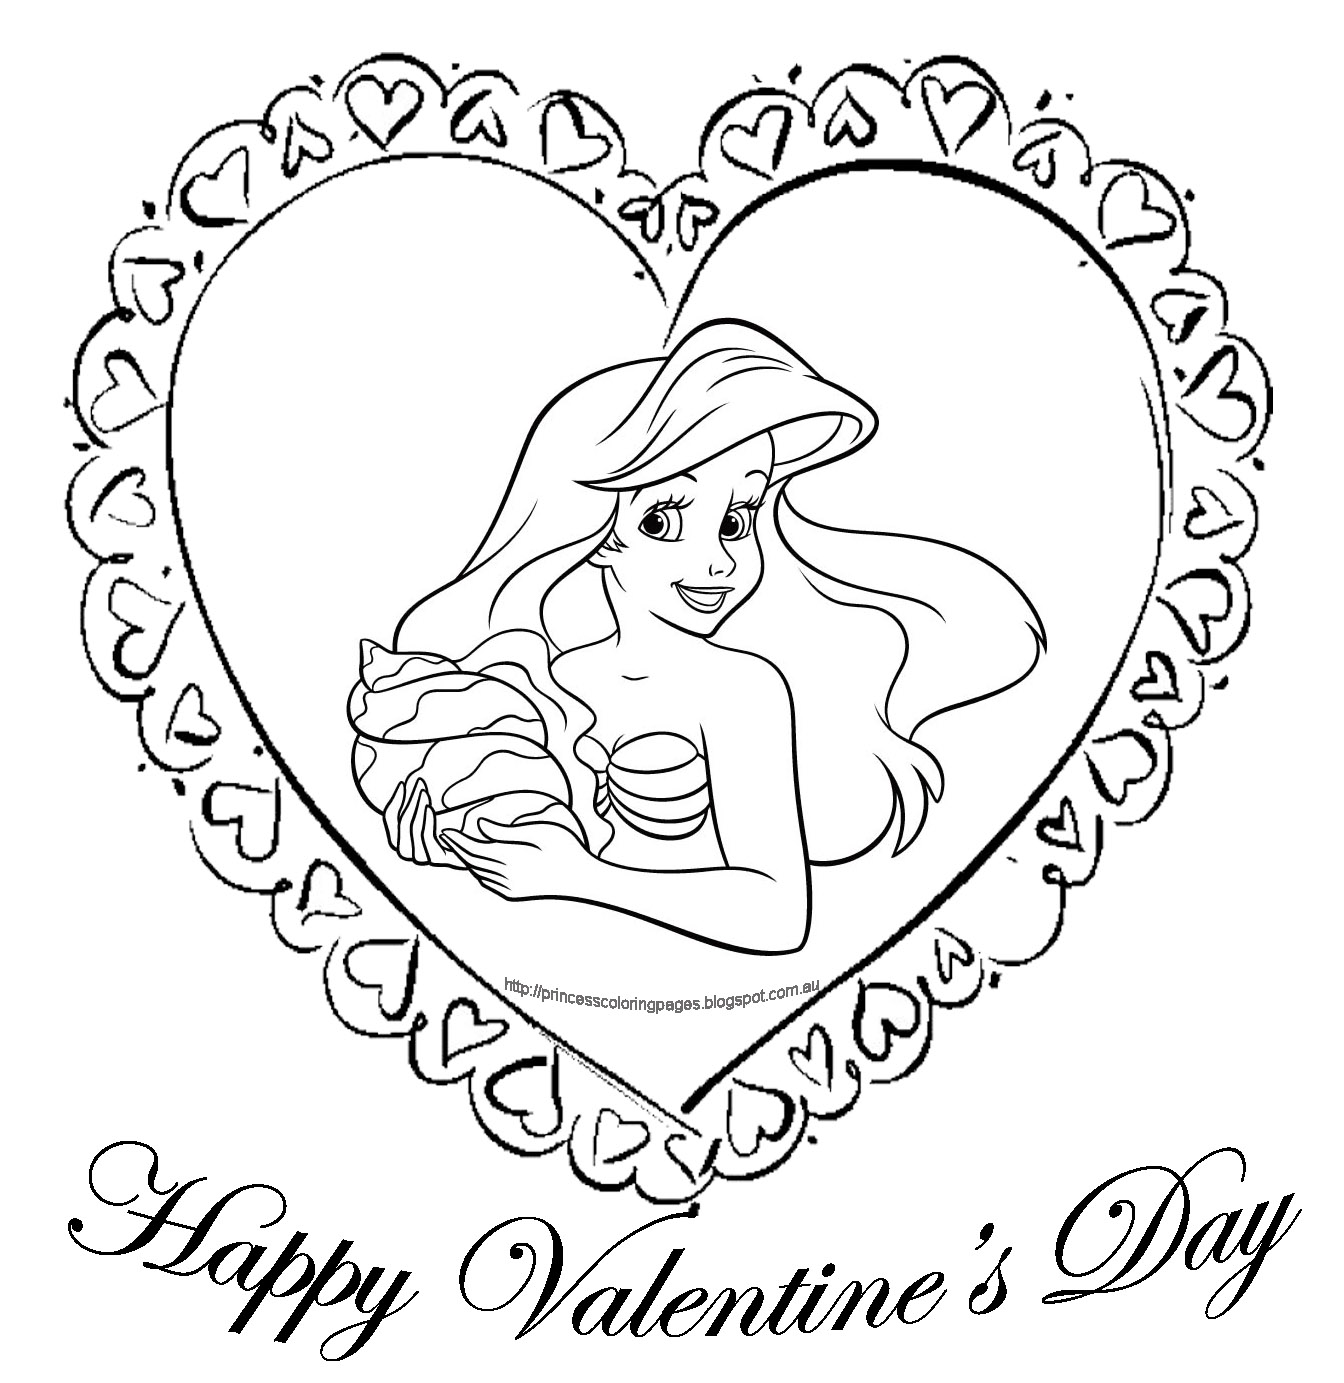 Coloring page: The Little Mermaid (Animation Movies) #127460 - Free Printable Coloring Pages